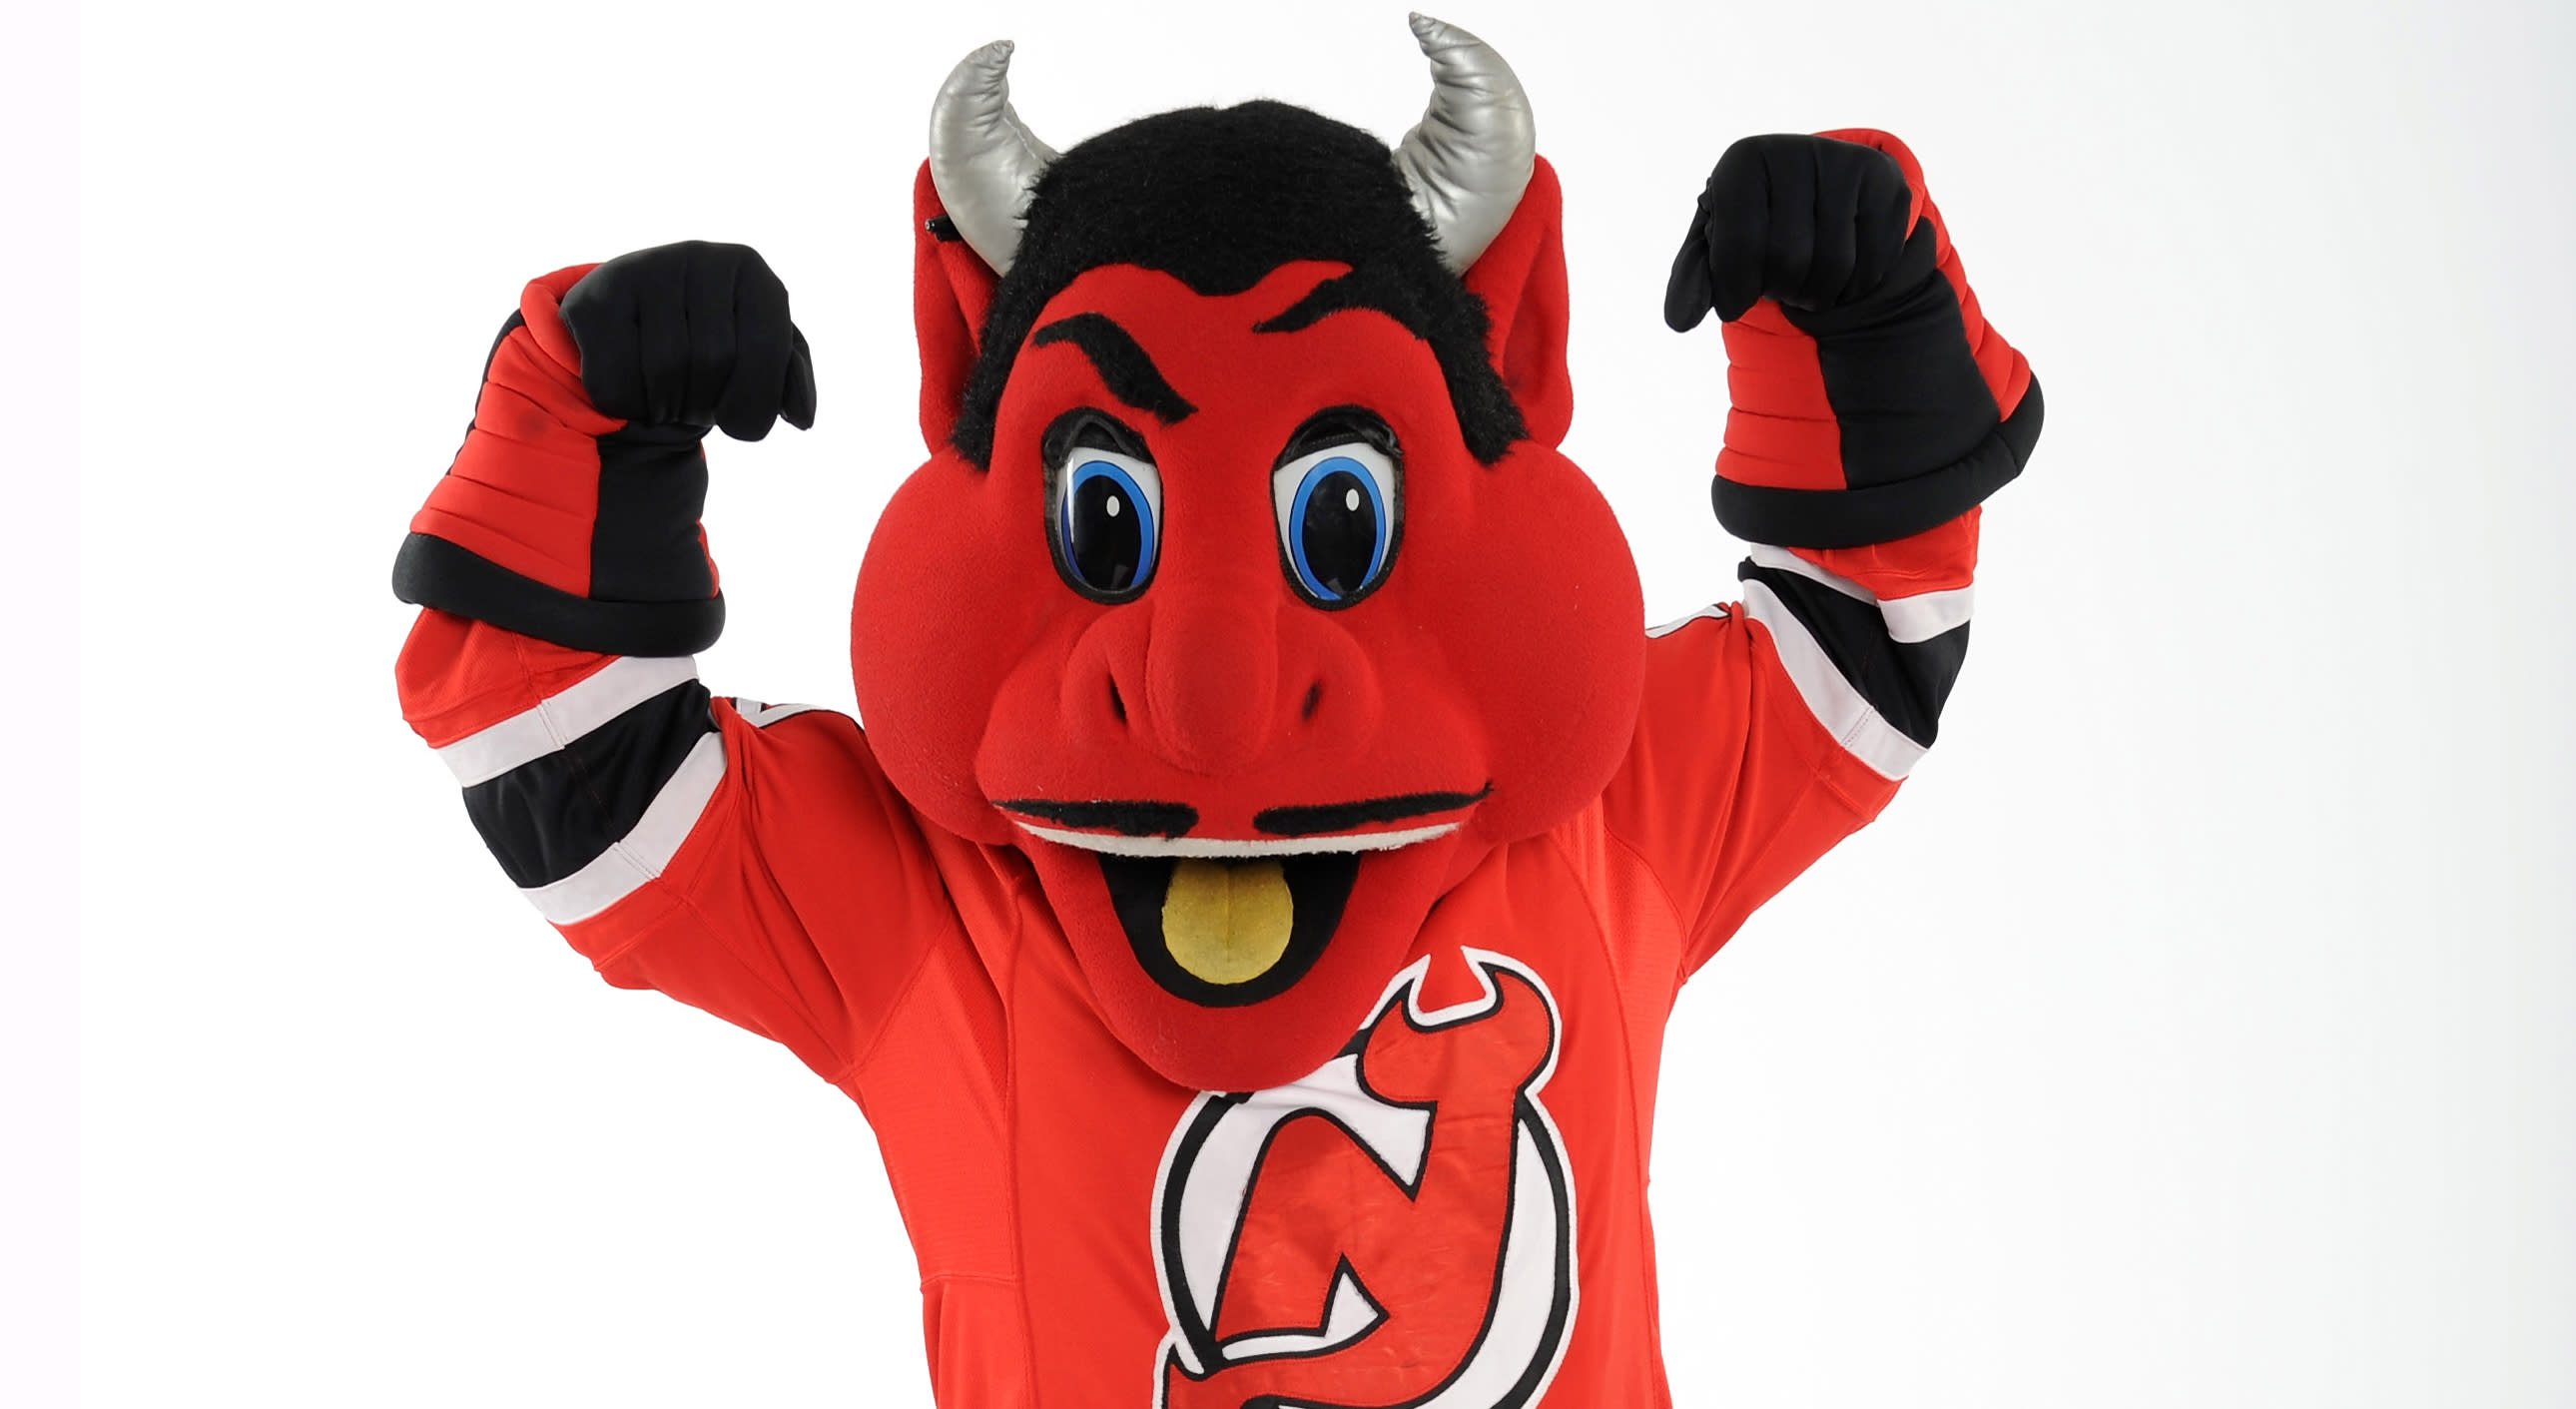 Devils' mascot takes a hammer to Gritty